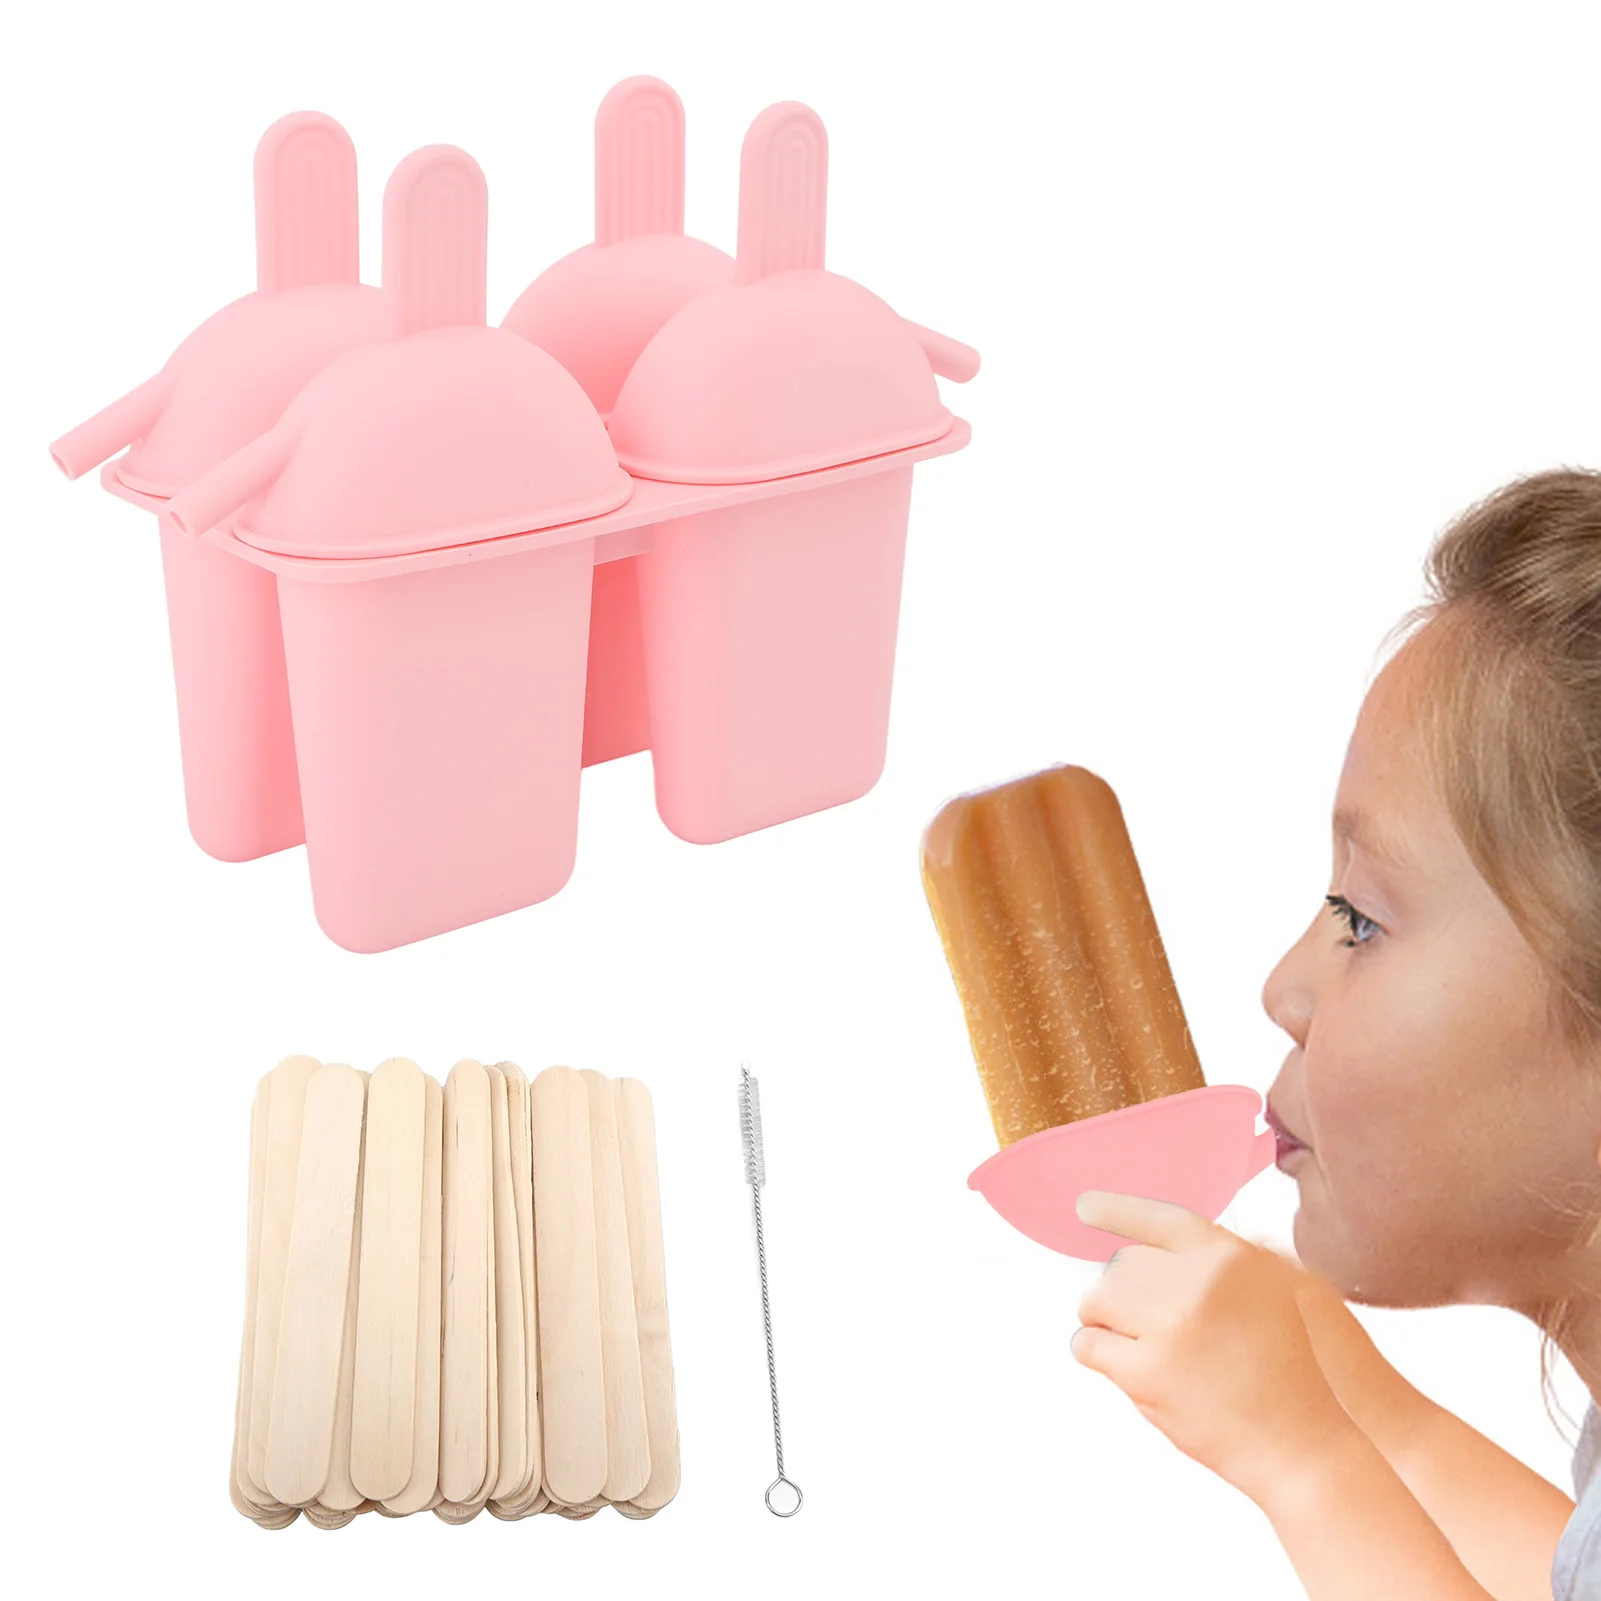 

4Hole Silicone Ice Cream Forms Popsicle Molds DIY Homemade Dessert Freezer Fruit Juice Ice Pop Cube Maker Mould With Sticks